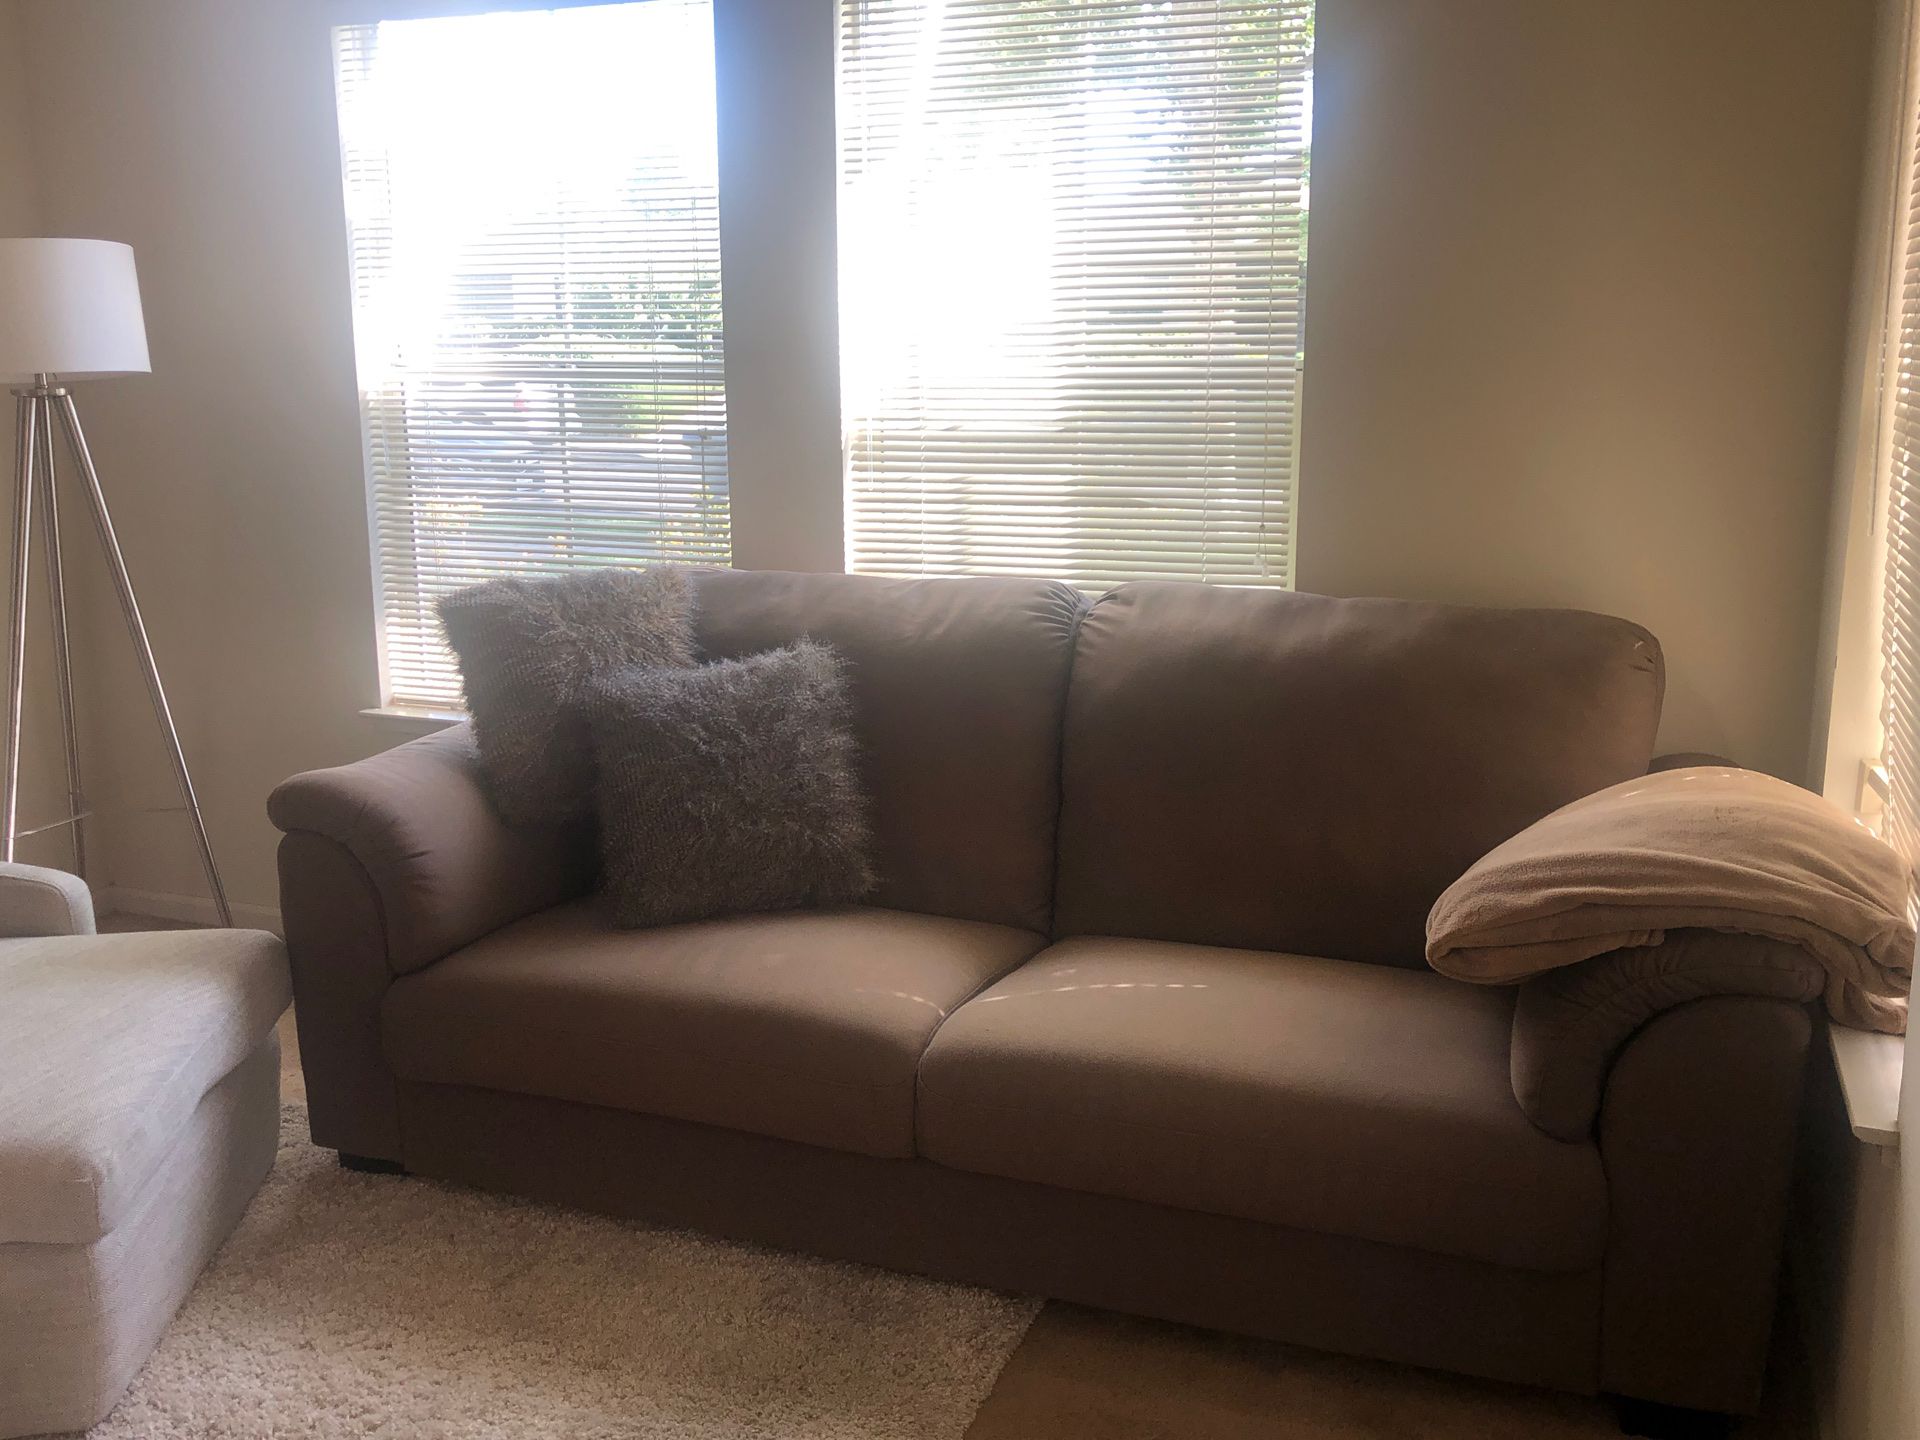 Beige couch in great condition - $60